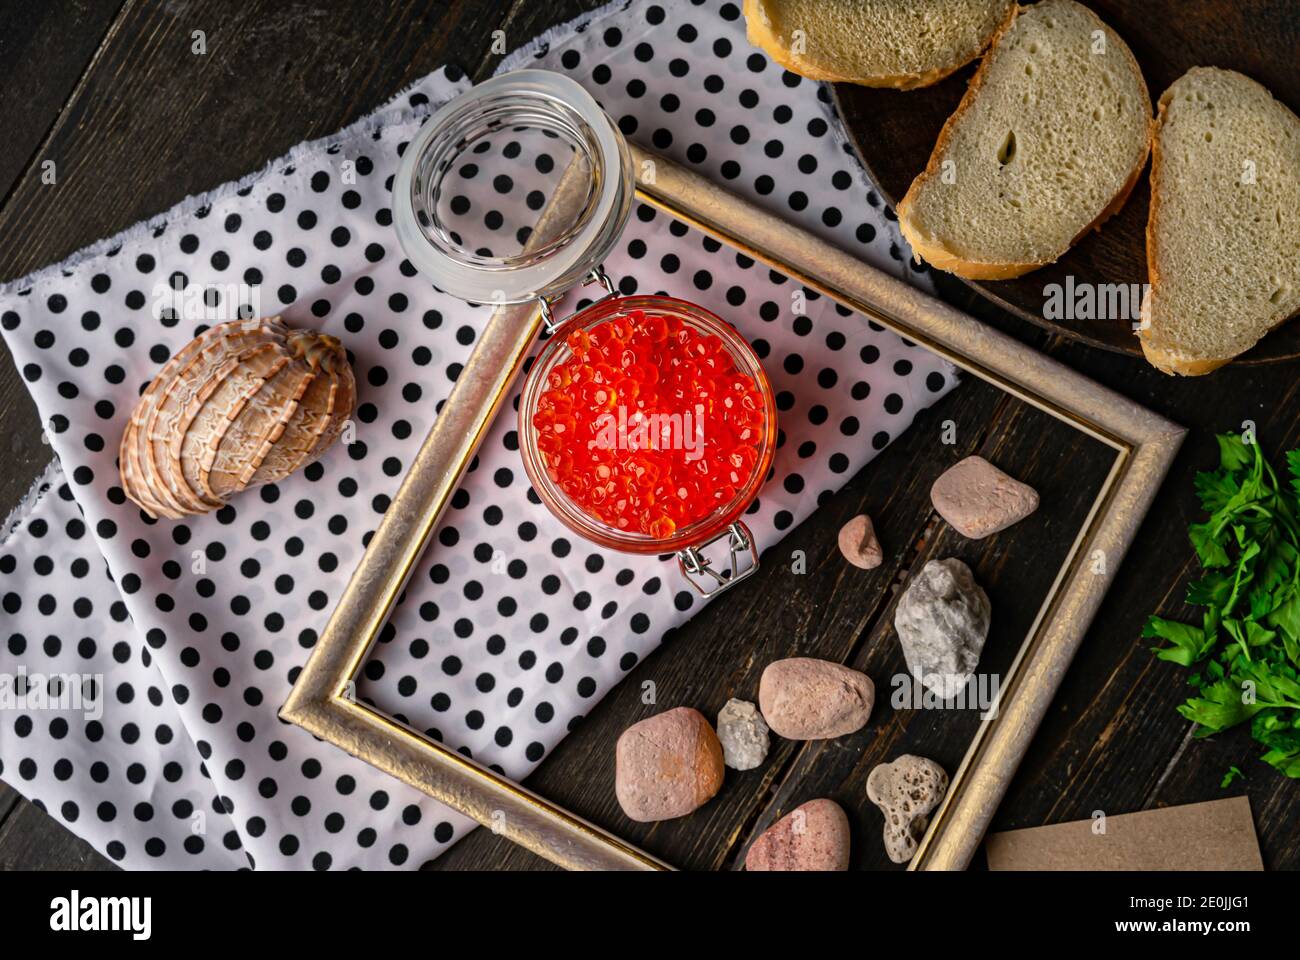 Chum salmon caviar in a glass bowl . Seafood, delicacies, healthy nutrition.  Stock Photo